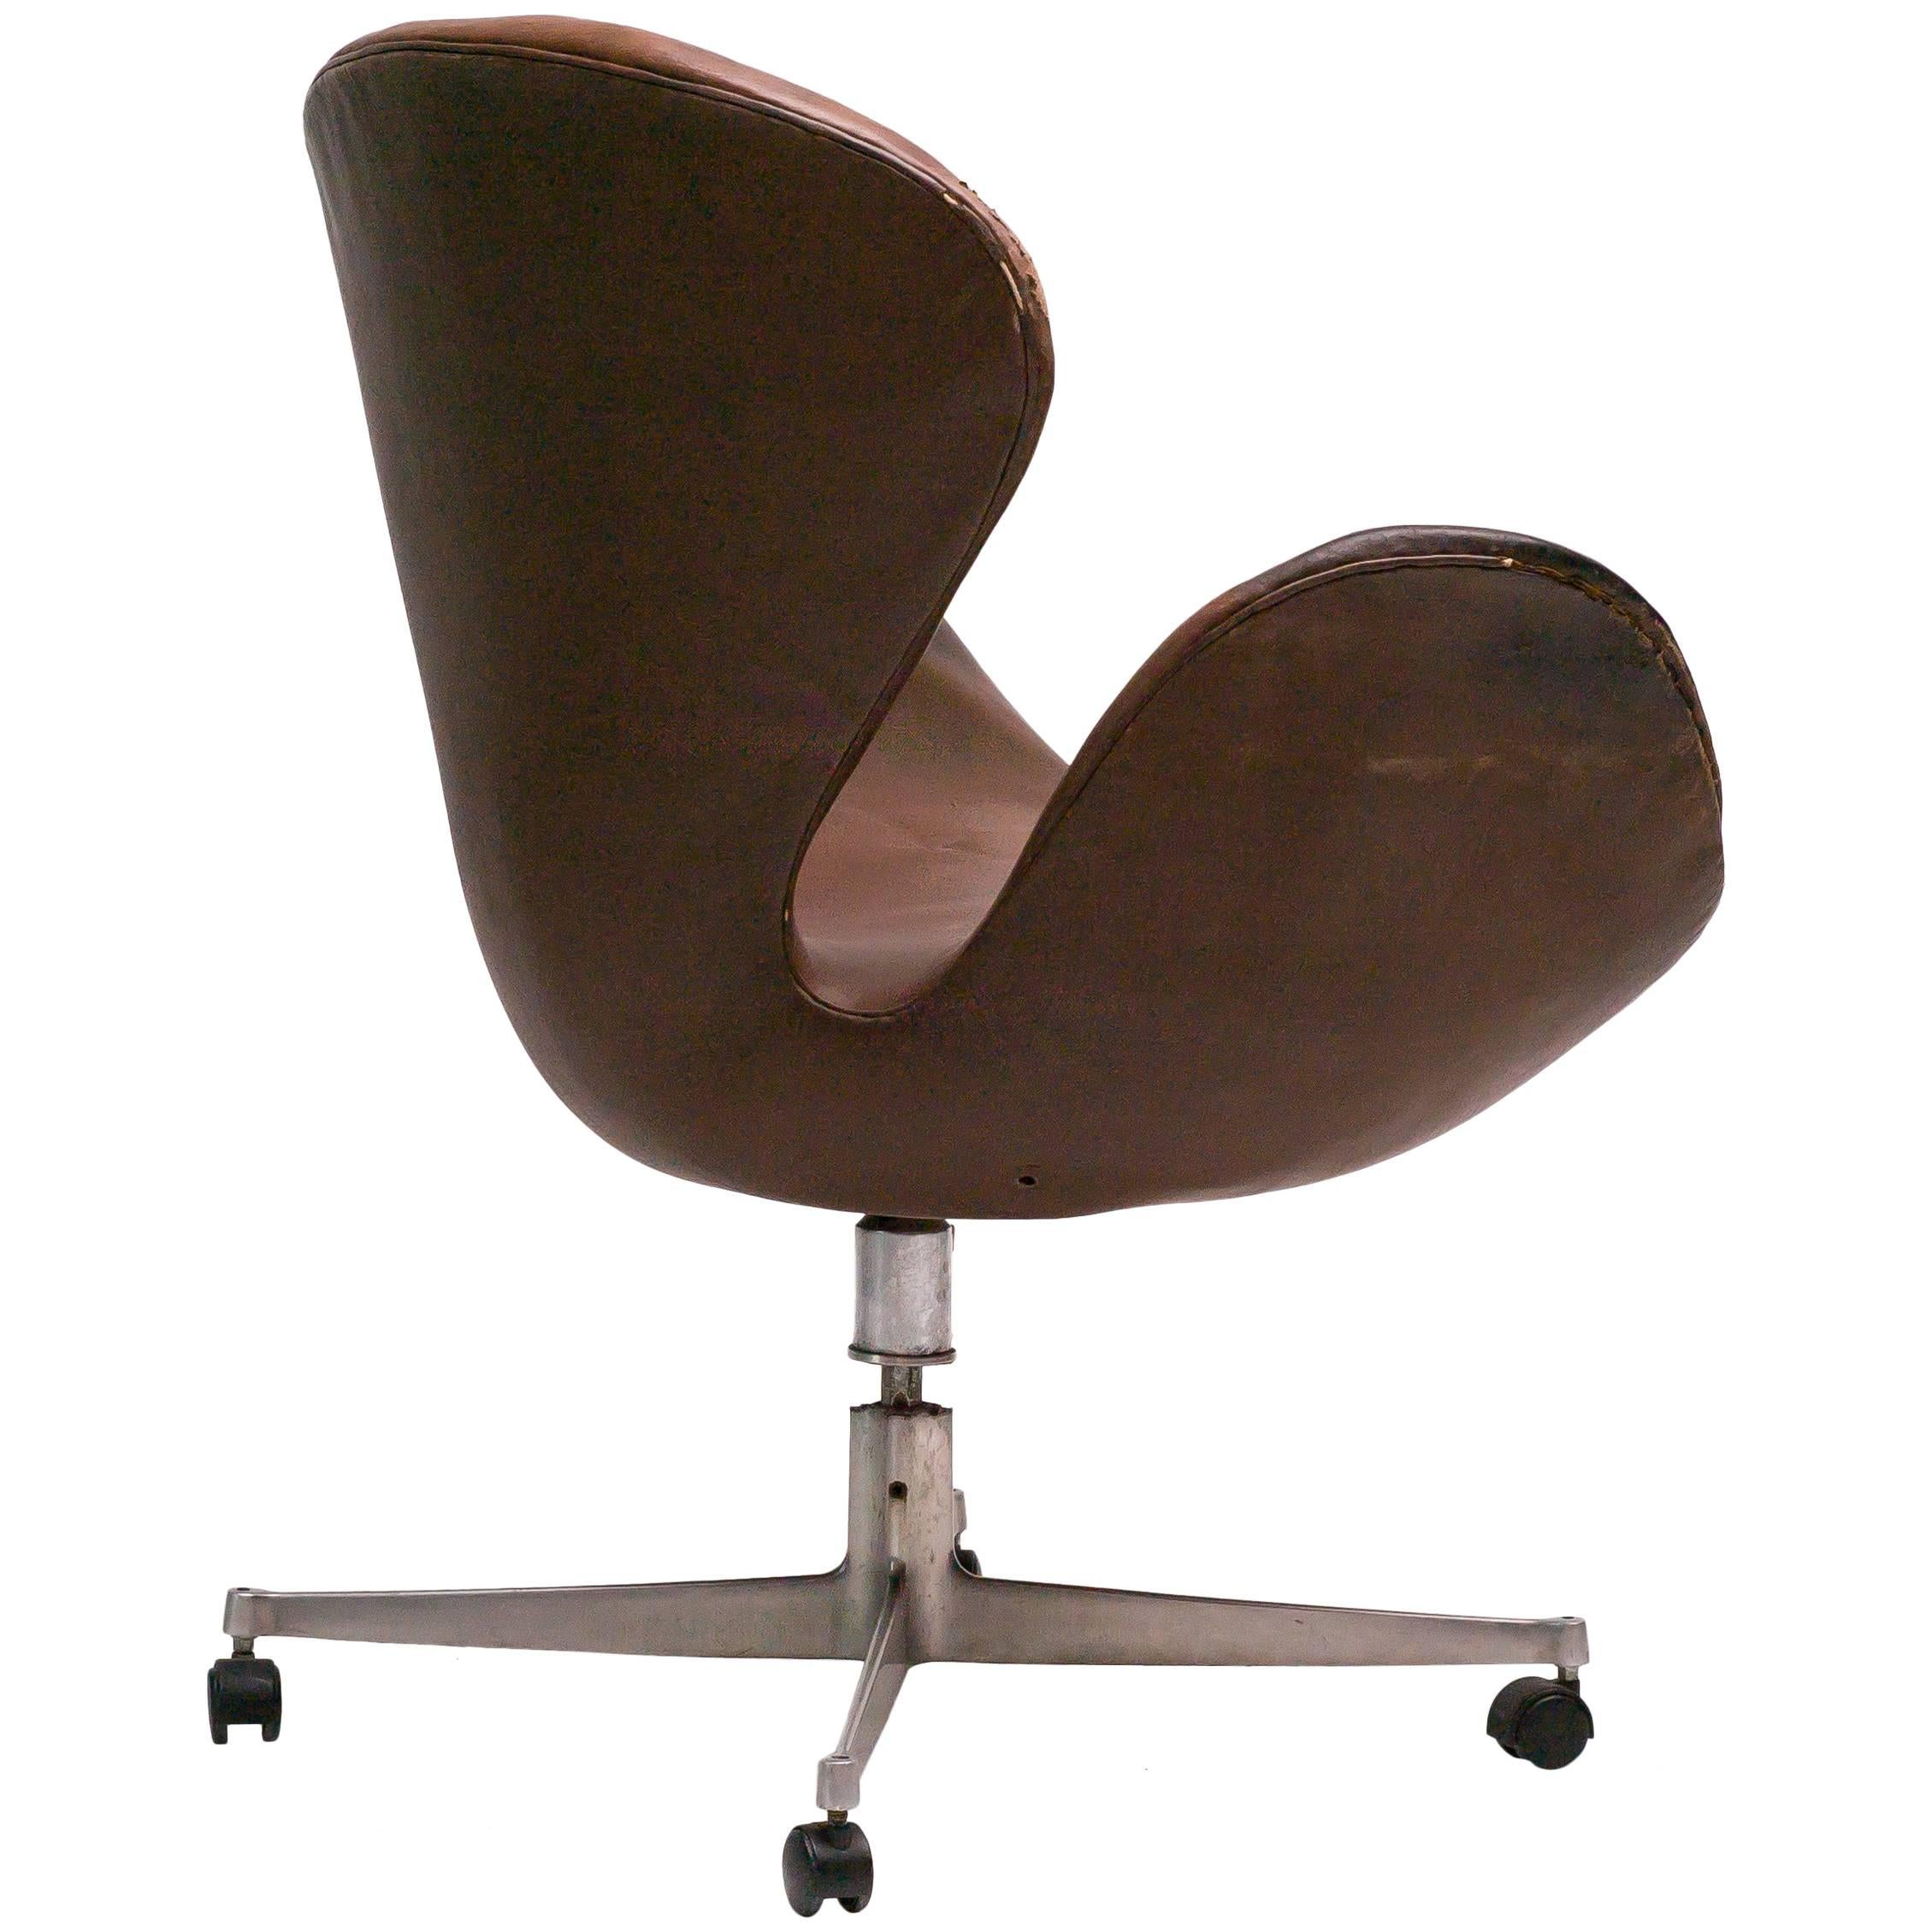 Very Rare Swan Desk Chair by Arne Jacobsen in Original Leather